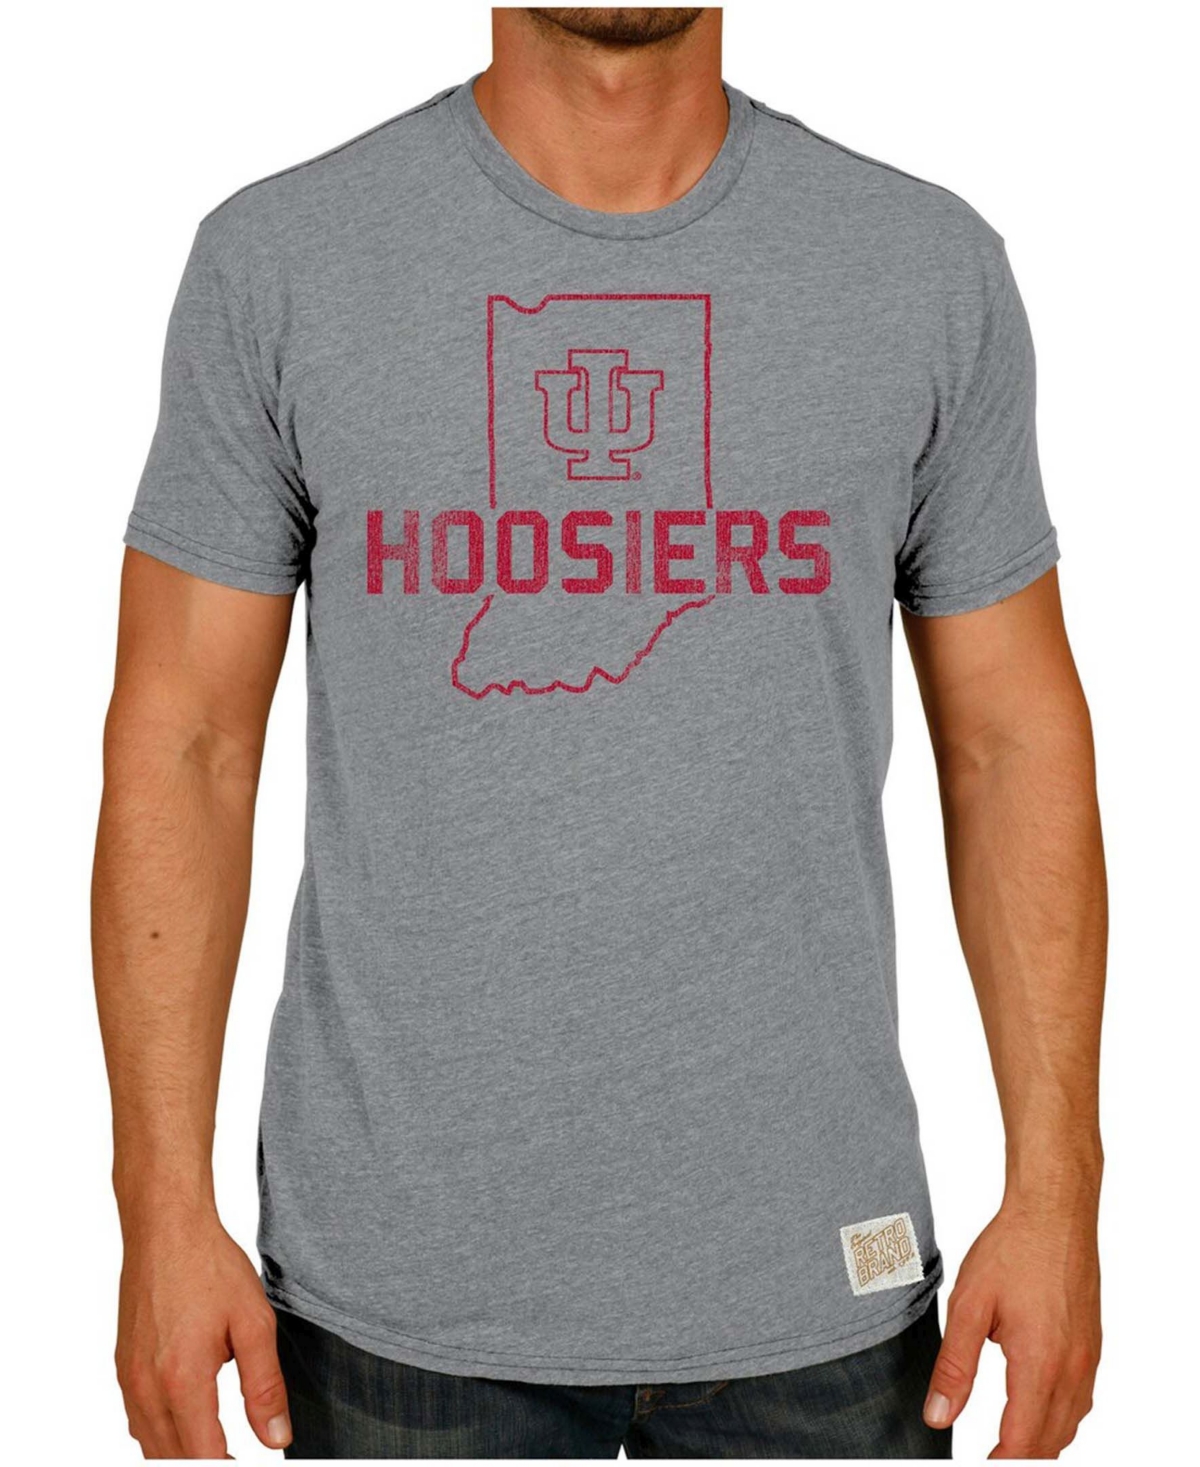 Men's Heather Gray Indiana Hoosiers Vintage-Inspired Tri-Blend T-shirt - Heather Gray